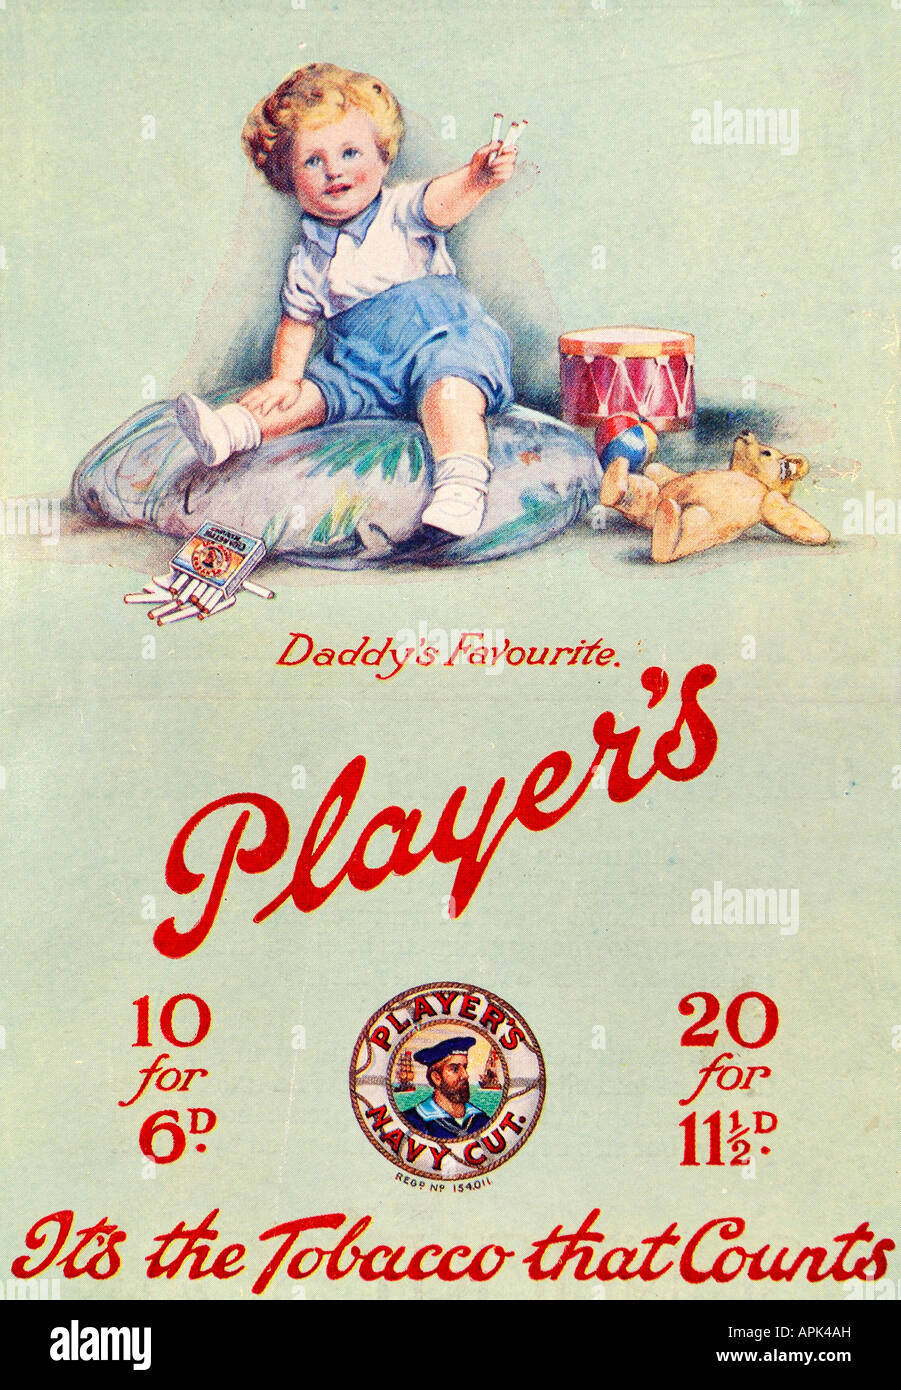 Child with Player's Cigarettes Vintage Advertisement For Editorial Use Only Stock Photo